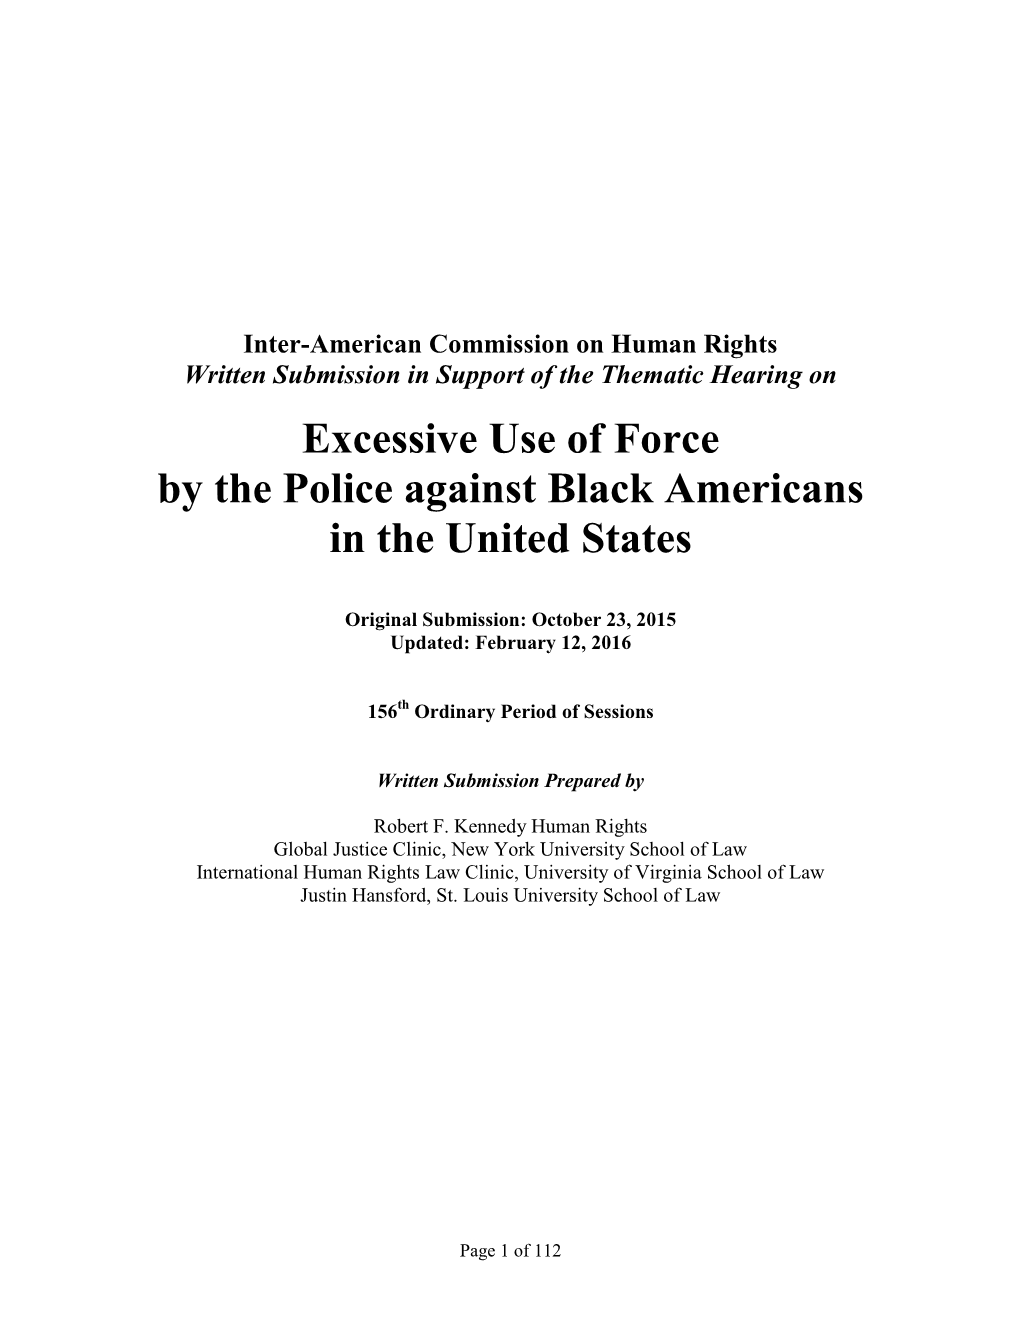 Excessive Use of Force by the Police Against Black Americans in the United States